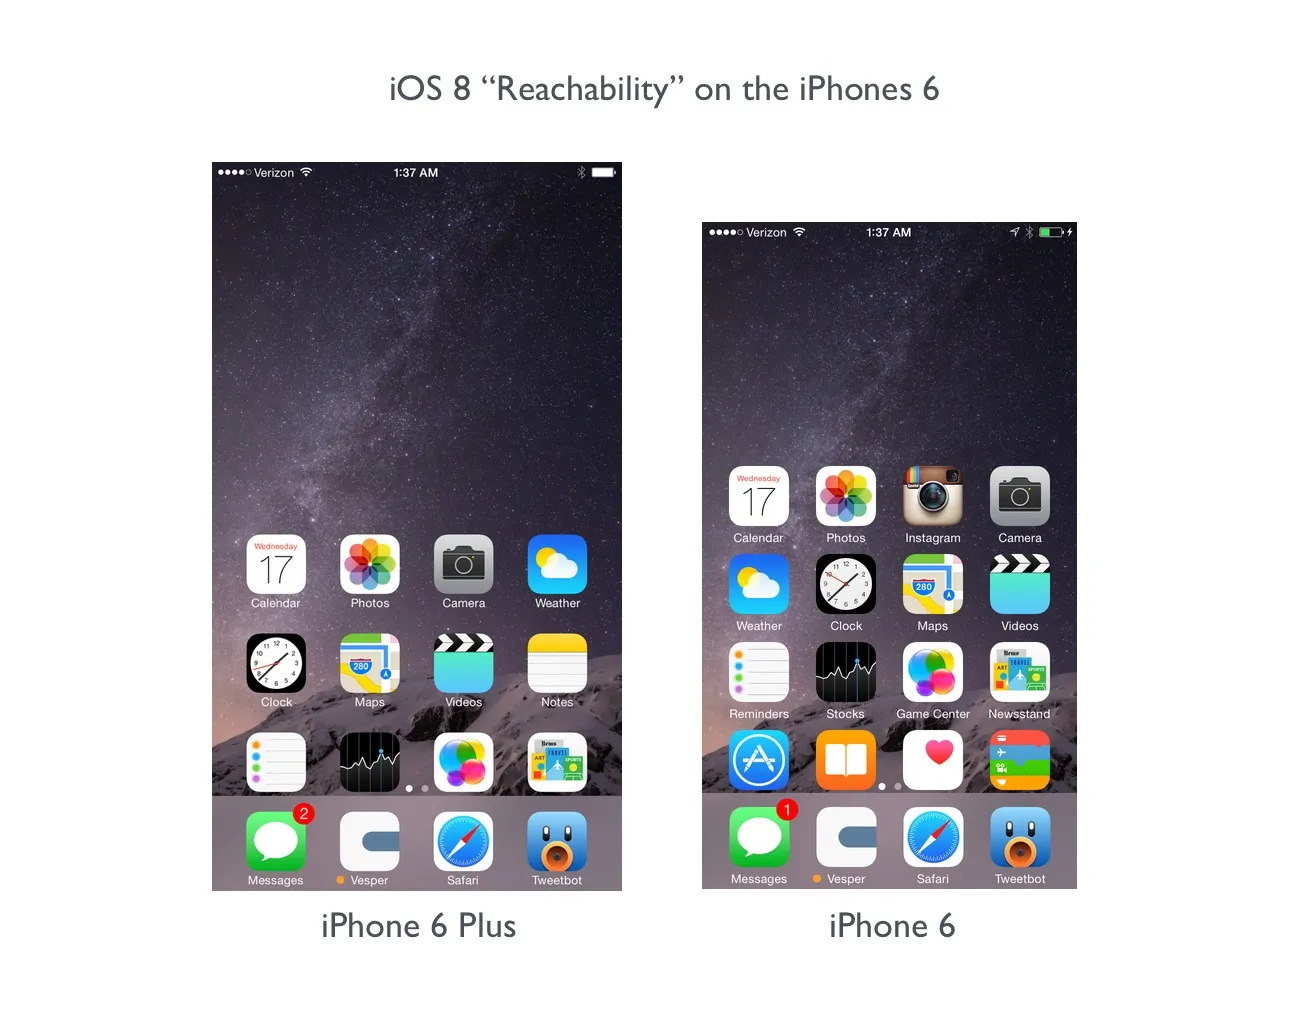 Reachability compared between iPhone 6 and 6 Plus